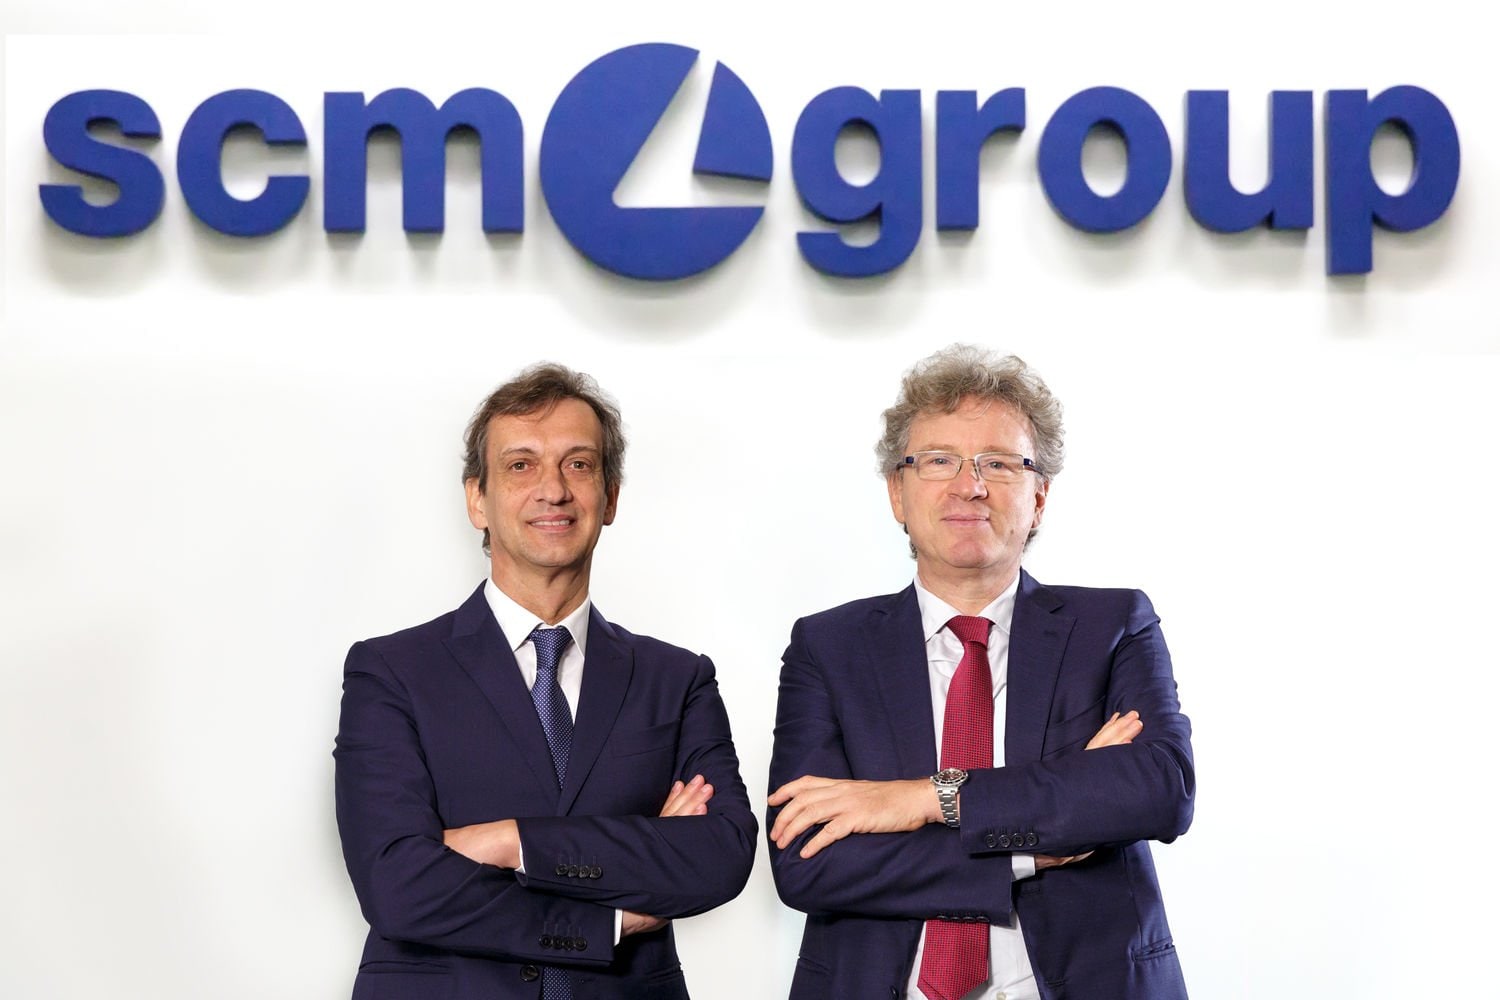 Scm Group confirms its financial stability and rewards innovation